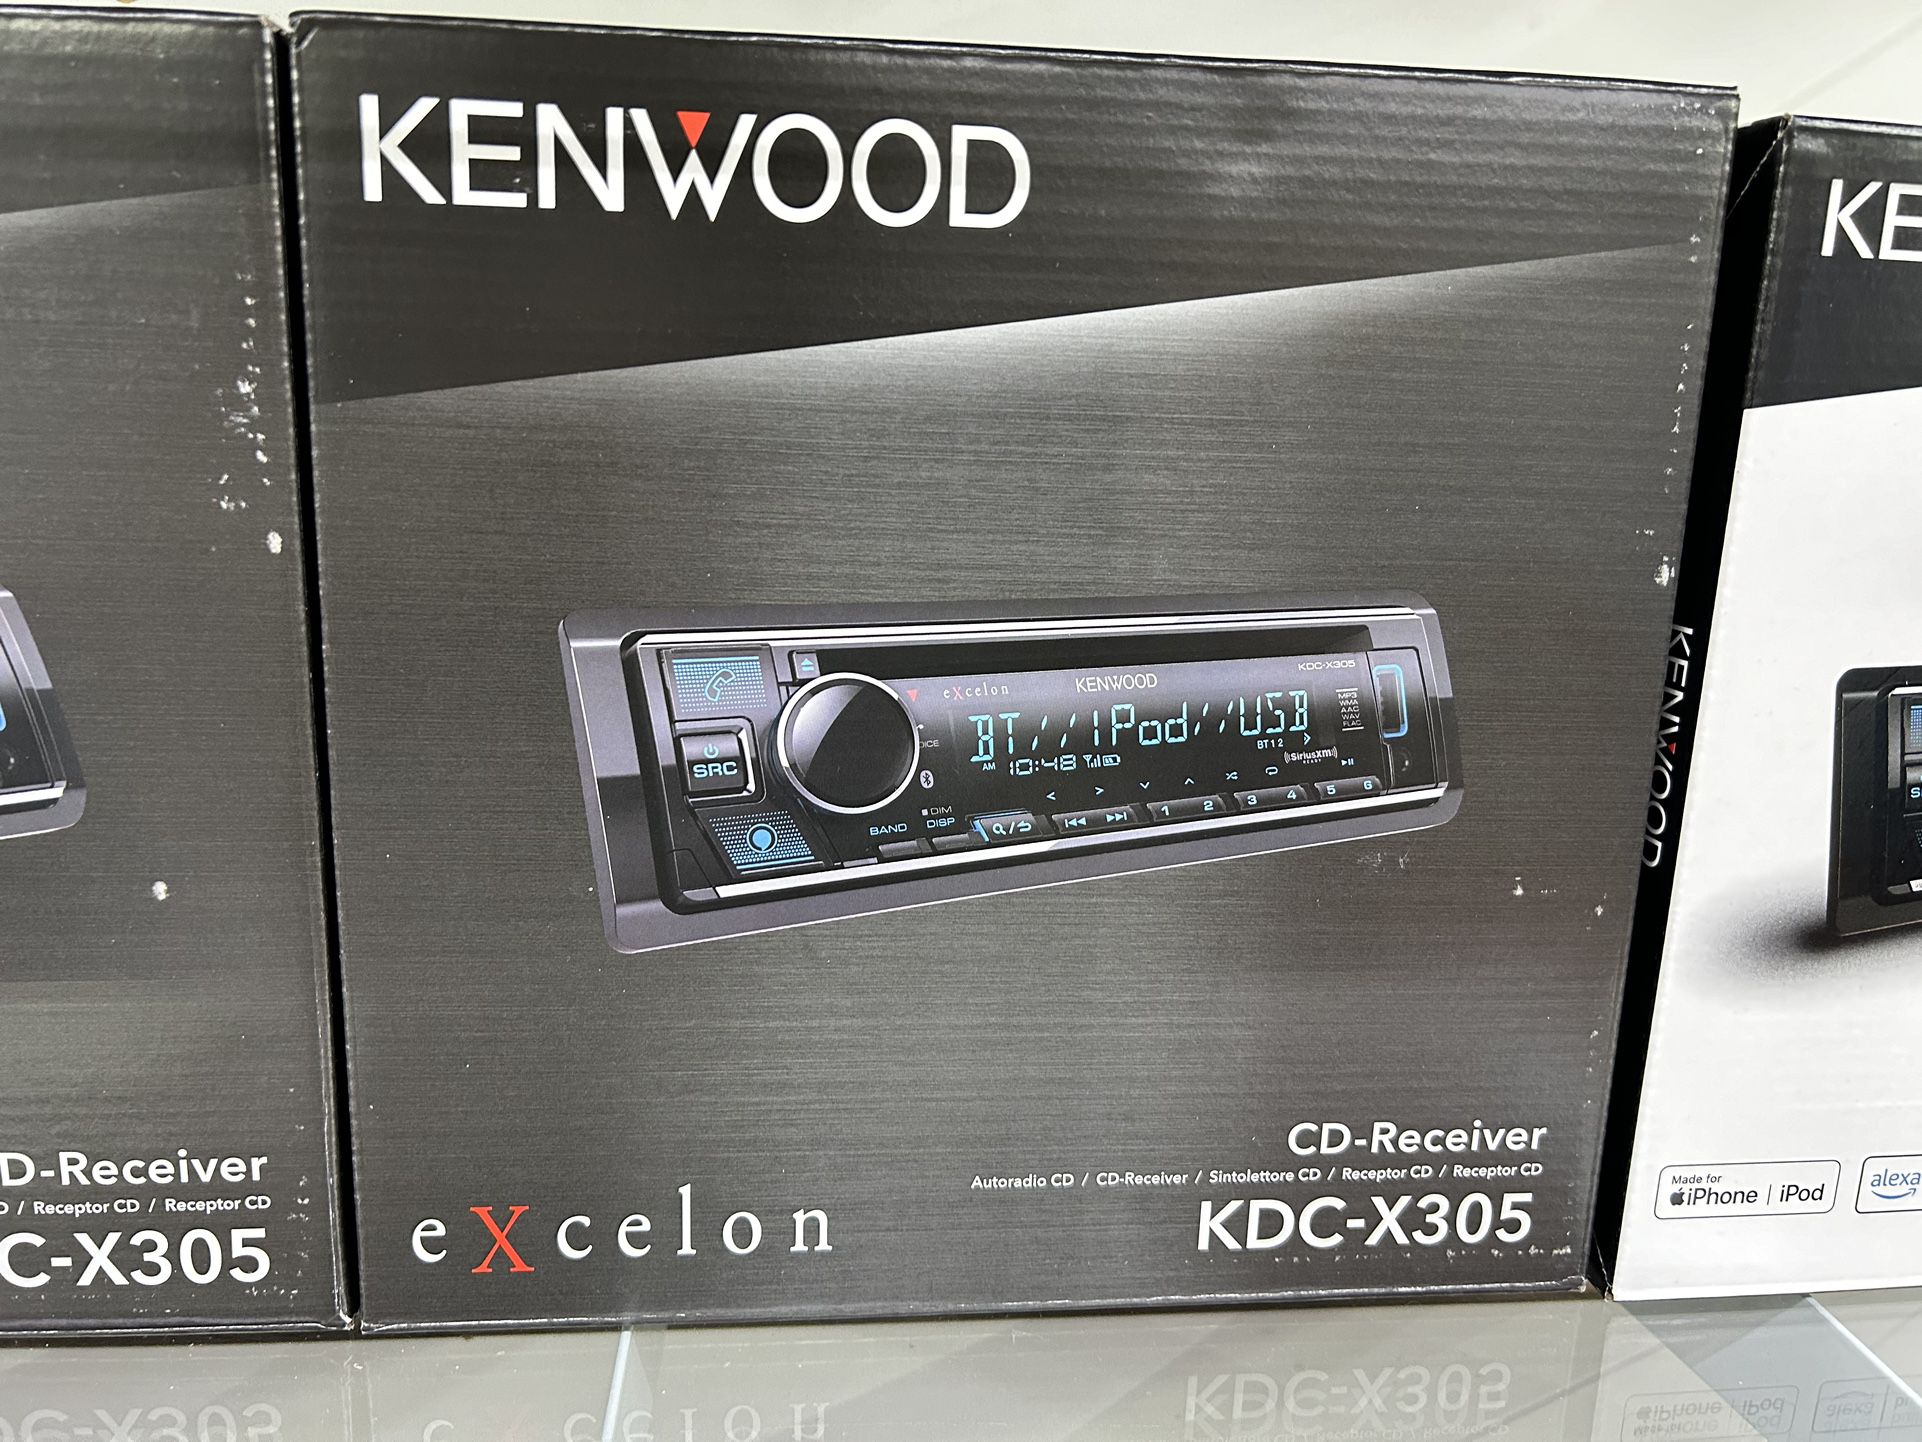 Kenwood Excelon KDC-X305 Am/Fm Cd Player, Stereo System, Bluetooth